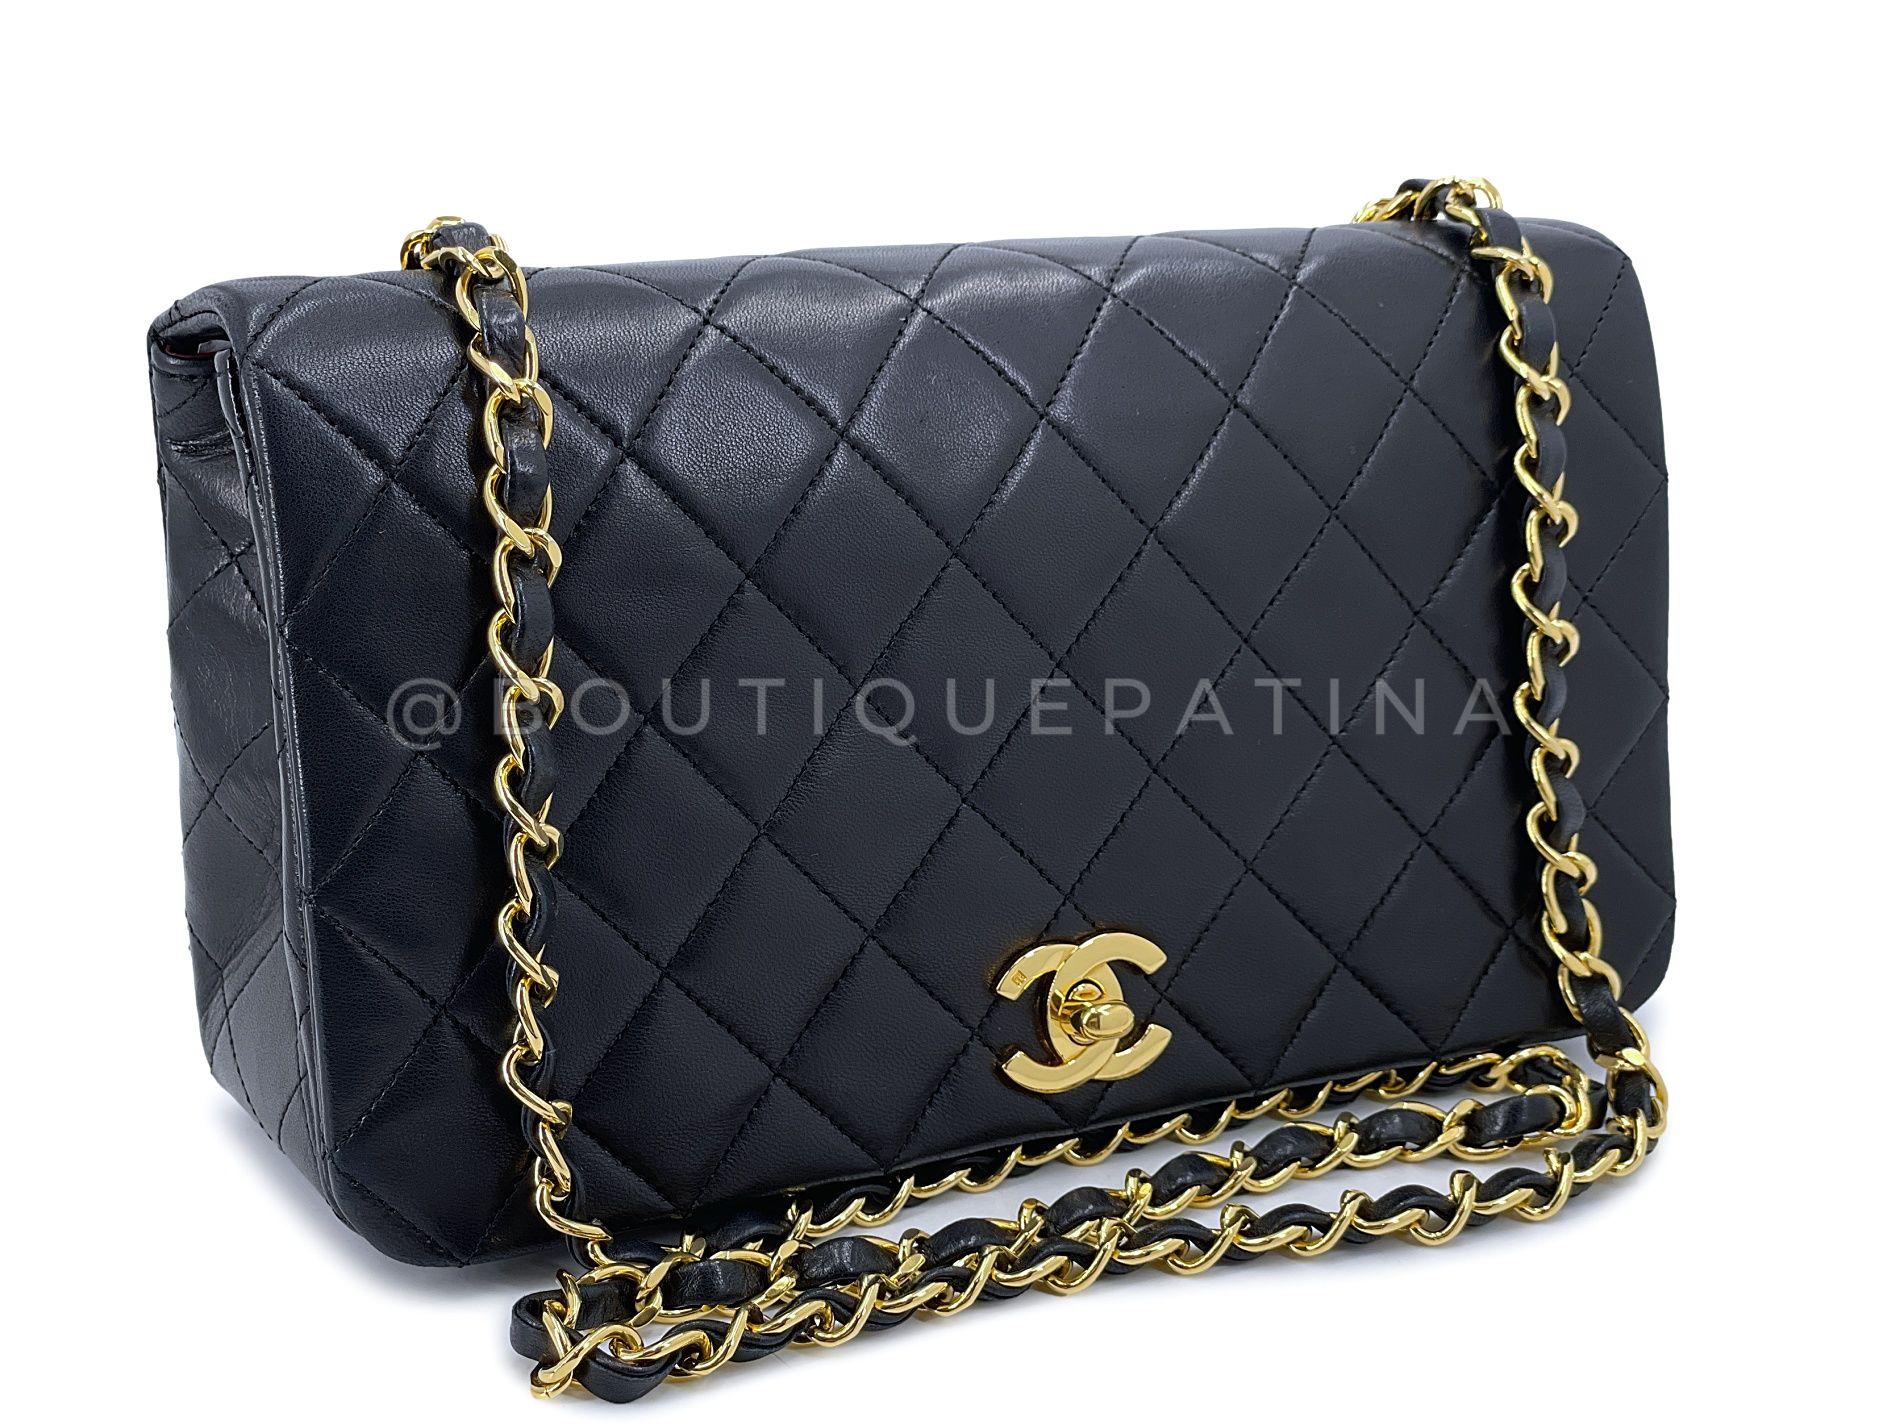 Store item: 68098
Butter soft, smooth lambskin and 24k gold hardware in impeccable condition from 1990. Vintage classic Chanel bags are known for their petal-soft lambskin, 24k gold plated hardware and sturdy craftsmanship.

Boutique Patina